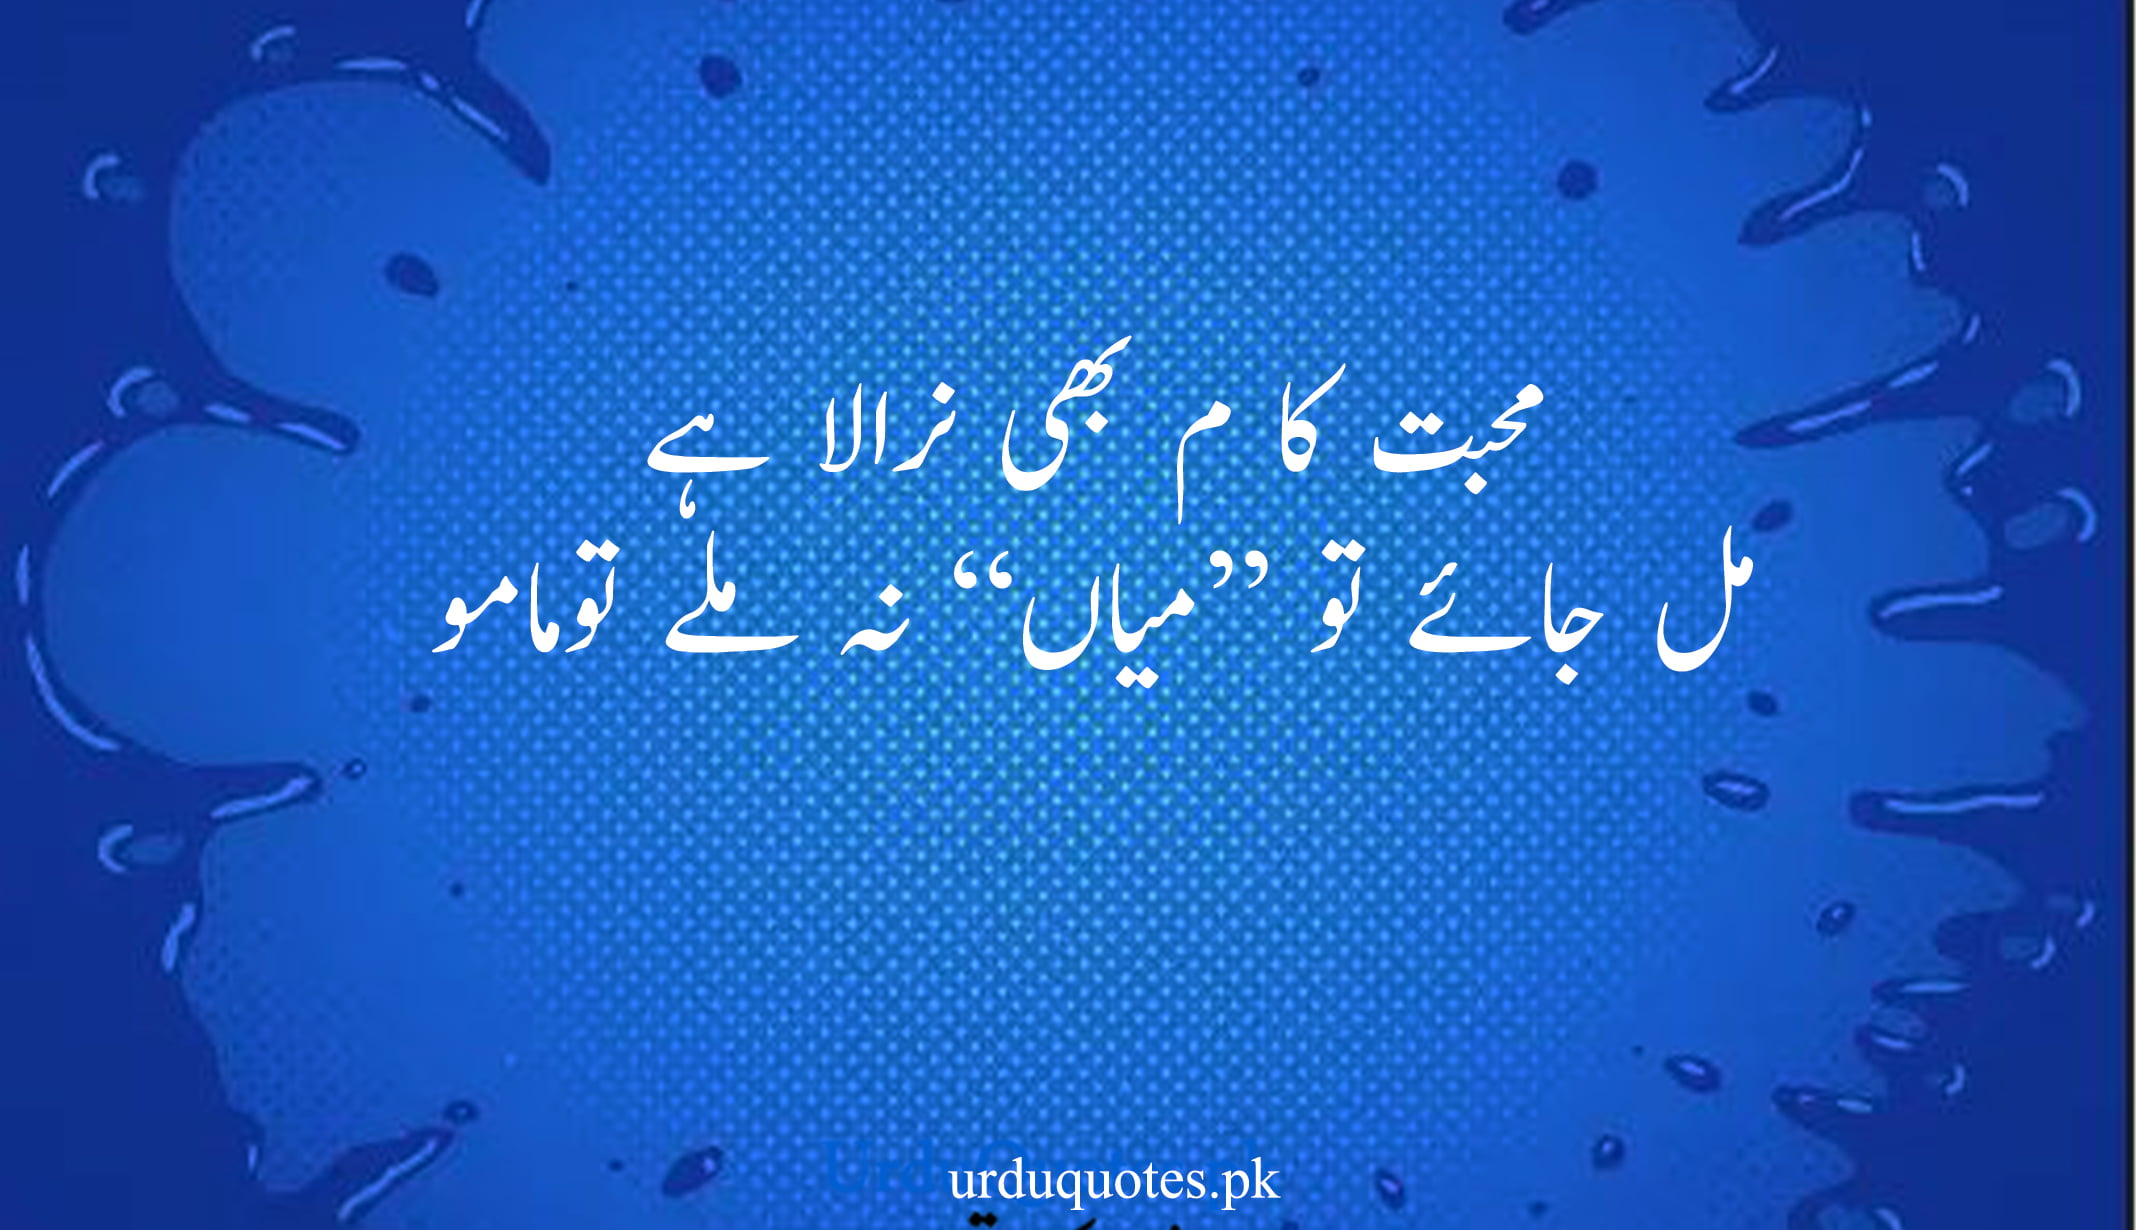 Funny Quotes in Urdu with Text and Images